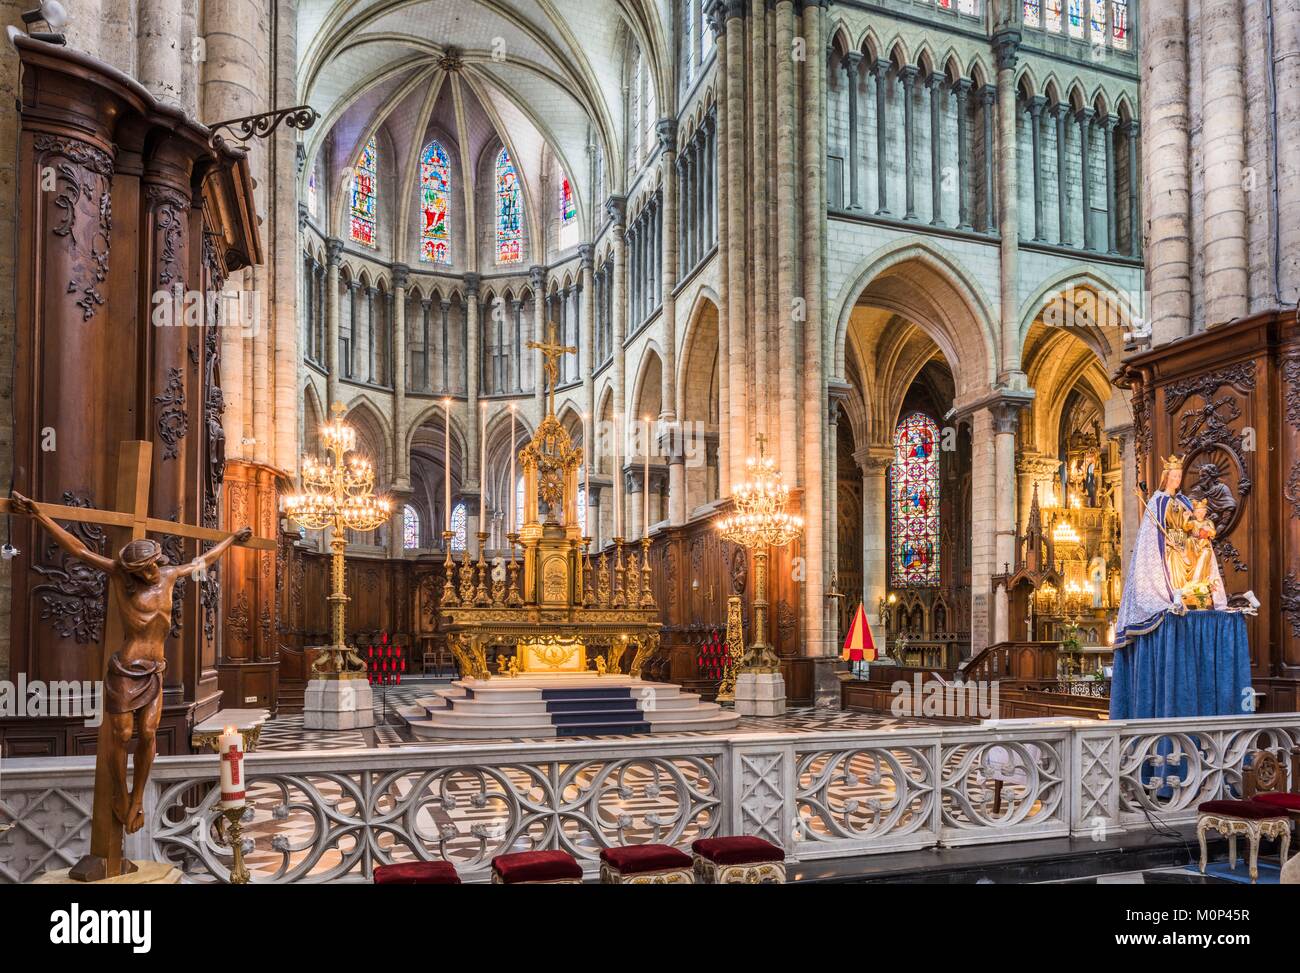 France,Pas de Calais,Saint Omer,the Gothic cathedral of Notre Dame de Saint Omer,13th century wooden statue of Our Lady of Miracles on the right side Stock Photo